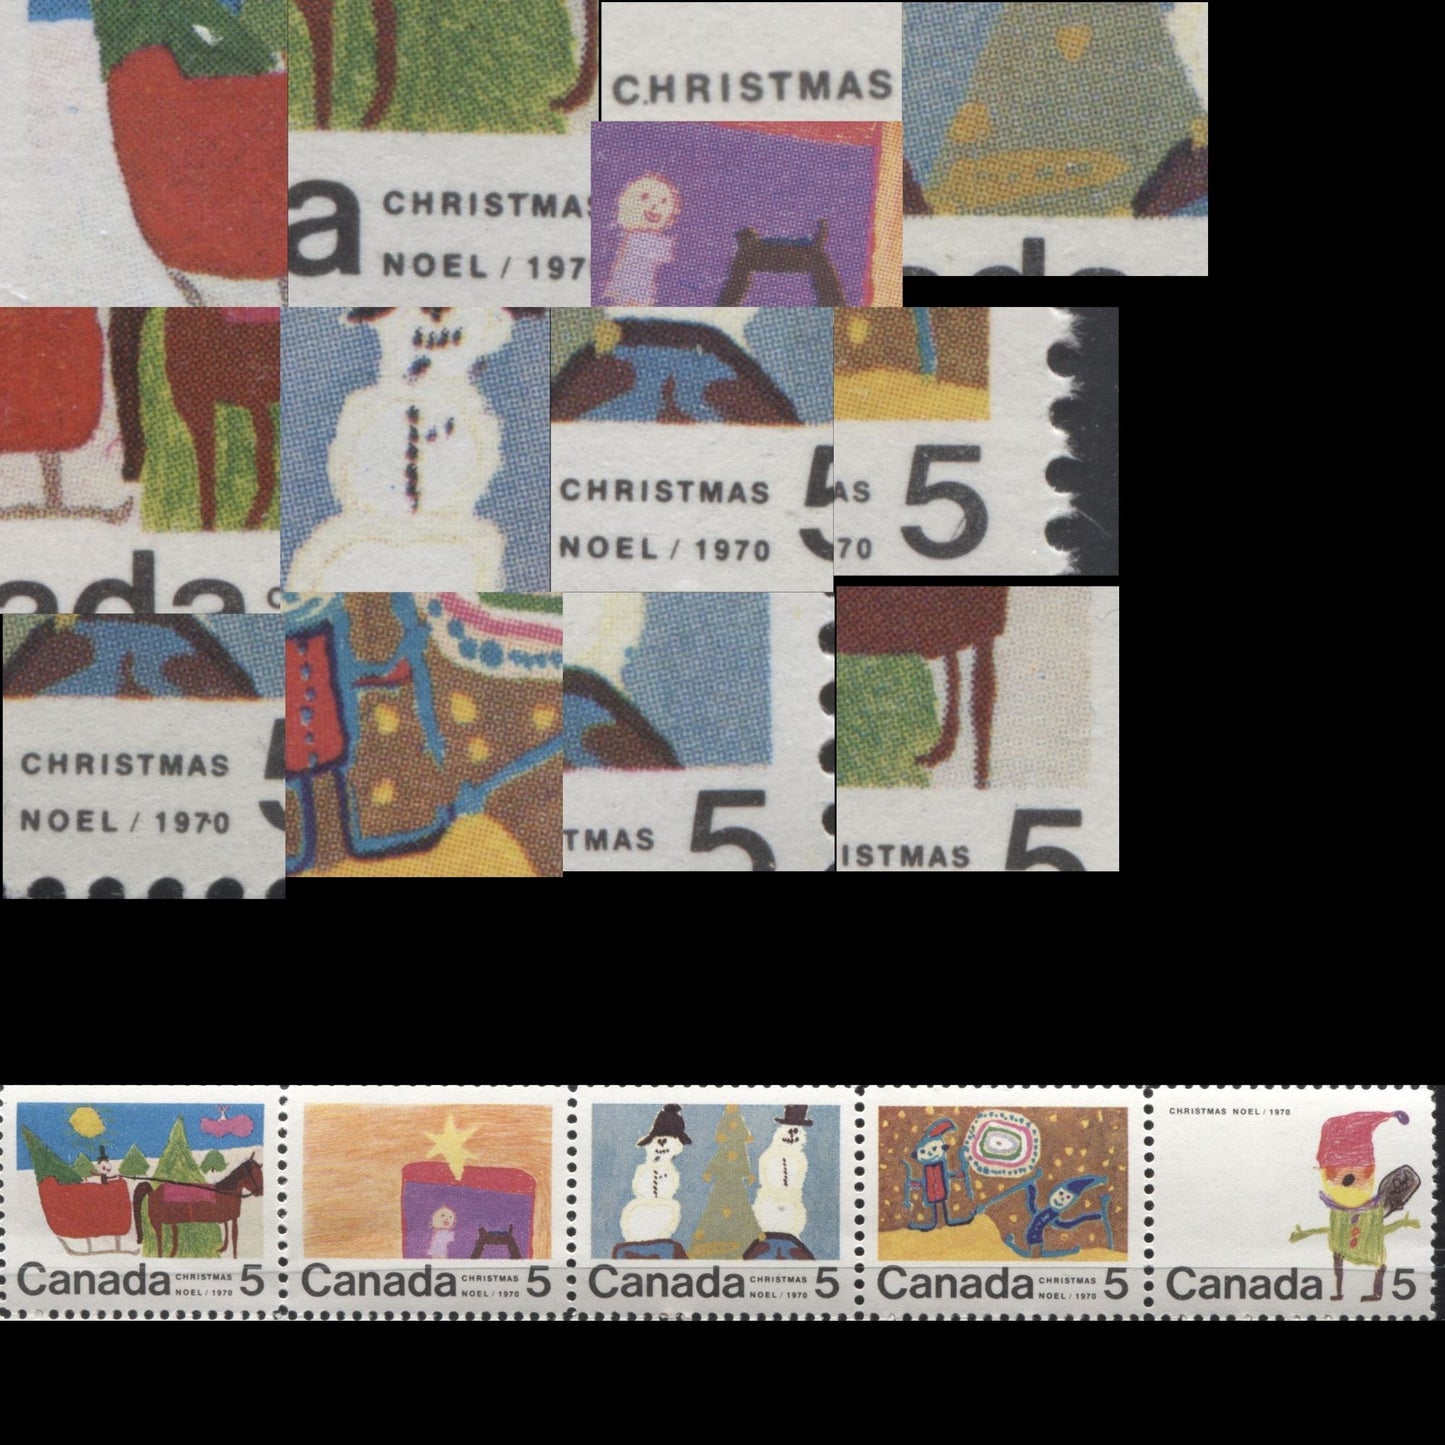 Lot 135 Canada #519-523 5c Multicoloured 1970 Christmas Issue, A complete Untagged, Unfolded Inscription Sheet of 100 Containing Combination #5 of Constant Varieties, Smooth HB12 Paper, Perf. 11.9 x 11.95